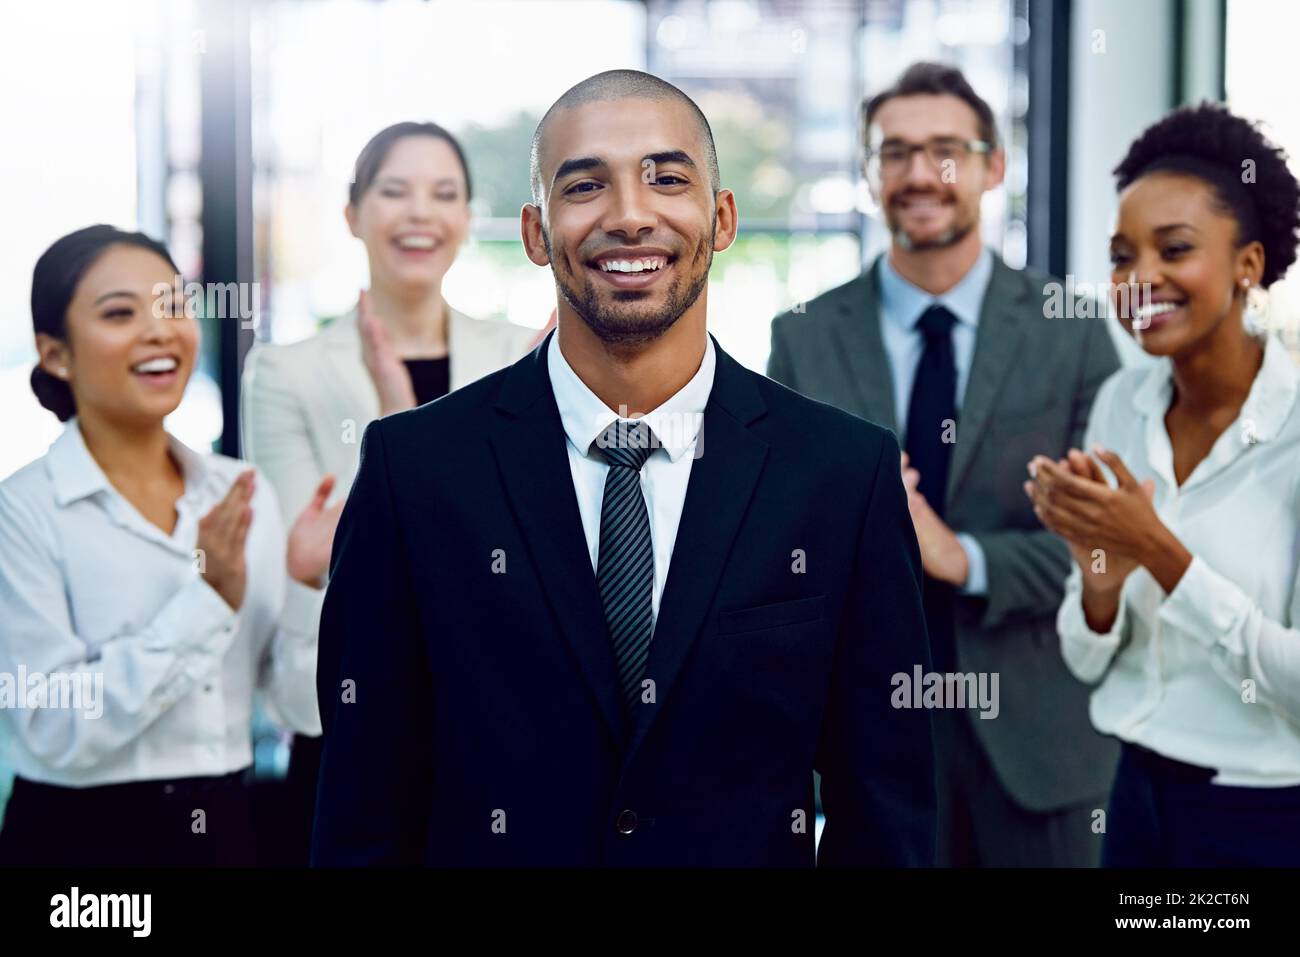 Another step up the corporate ladder. Portrait of a succesful businessman being applauded by his colleagues in the office. Stock Photo